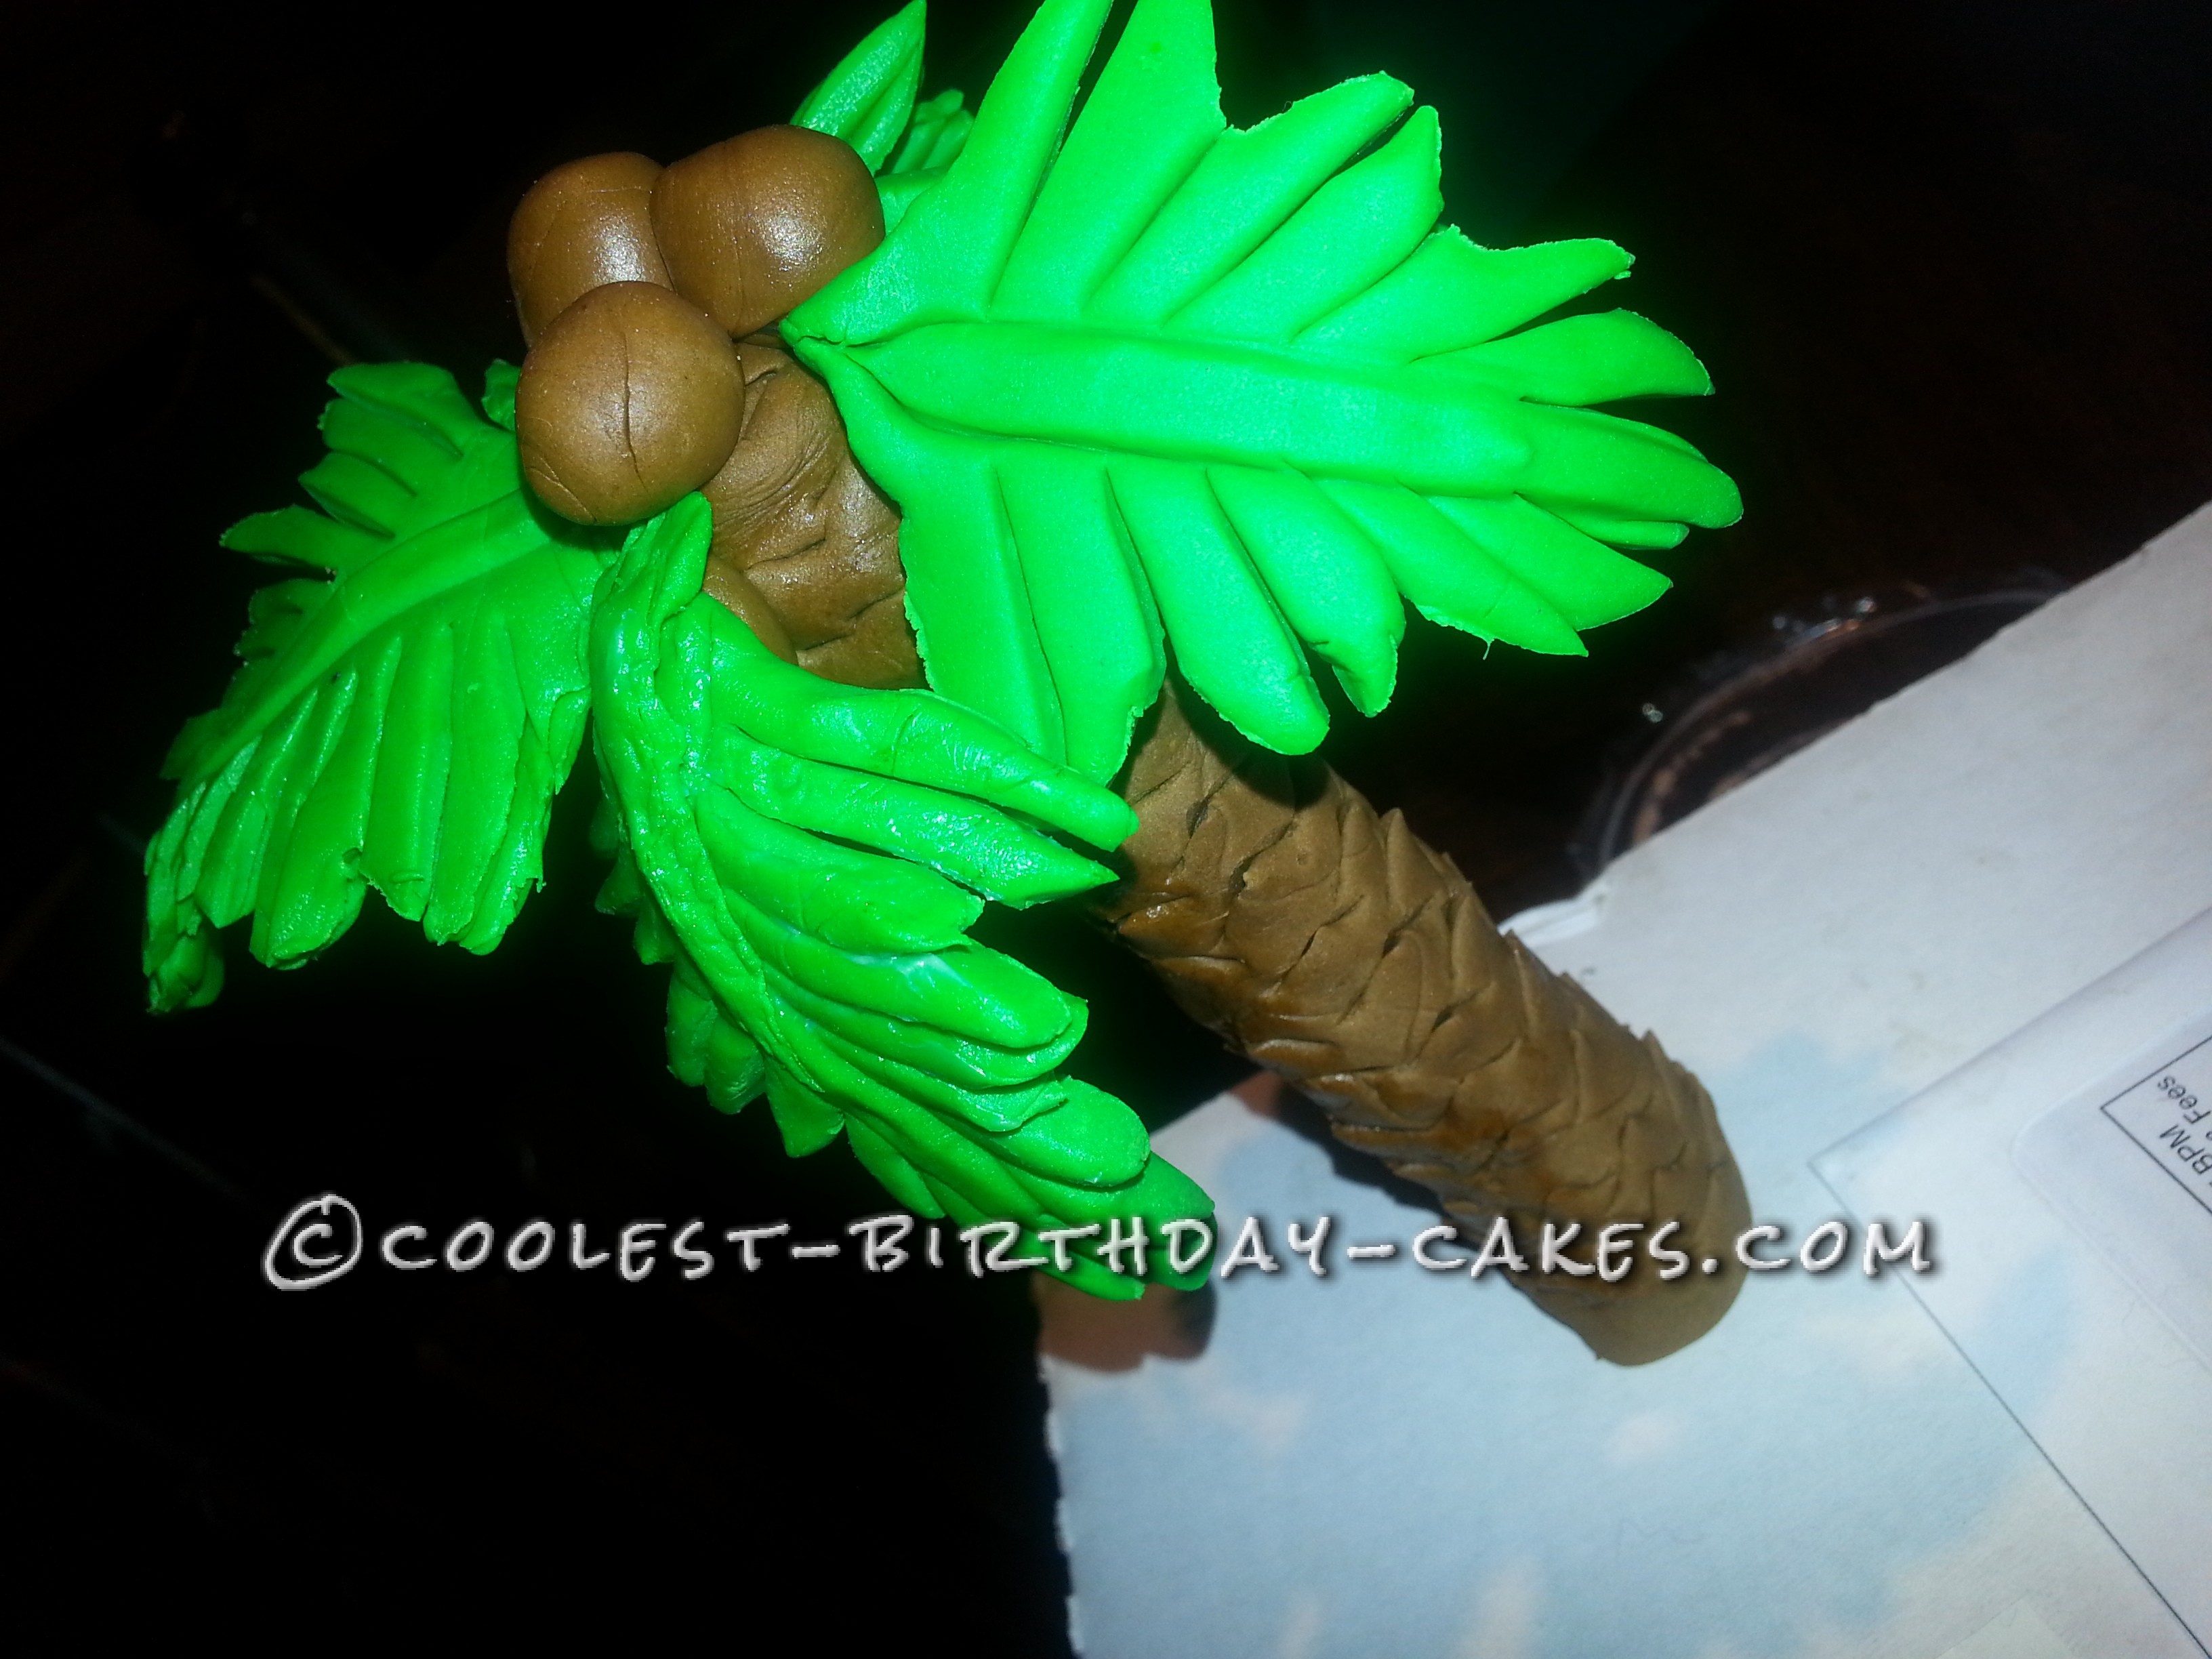 Coolest Go Diego Go Jungle Waterfall Cake